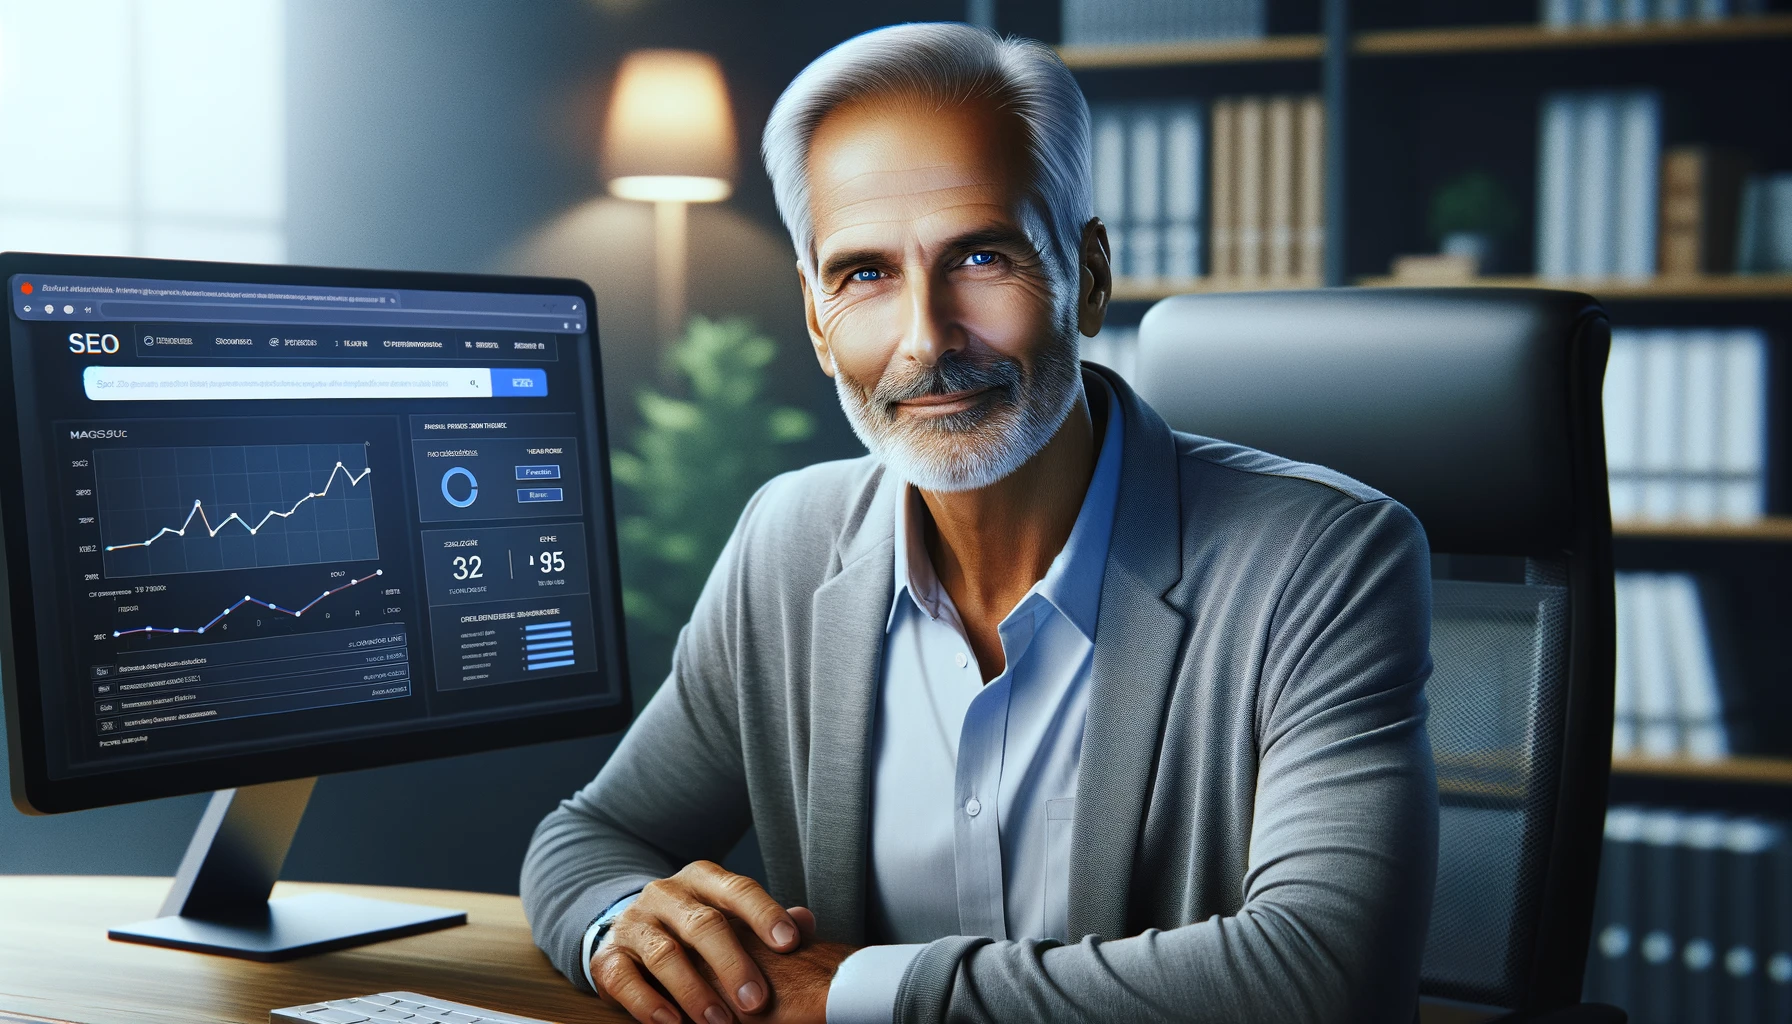 A mature man is sitting in a modern office space, looking directly at the camera with a content and dignified expression. He is working on SEO analysis on his computer, which displays an interface resembling Majestic SEO, complete with various SEO metrics and analysis tools. His professional and composed demeanor reflects his expertise in digital marketing. The scene is photorealistic, capturing him in a comfortable and professional office environment.